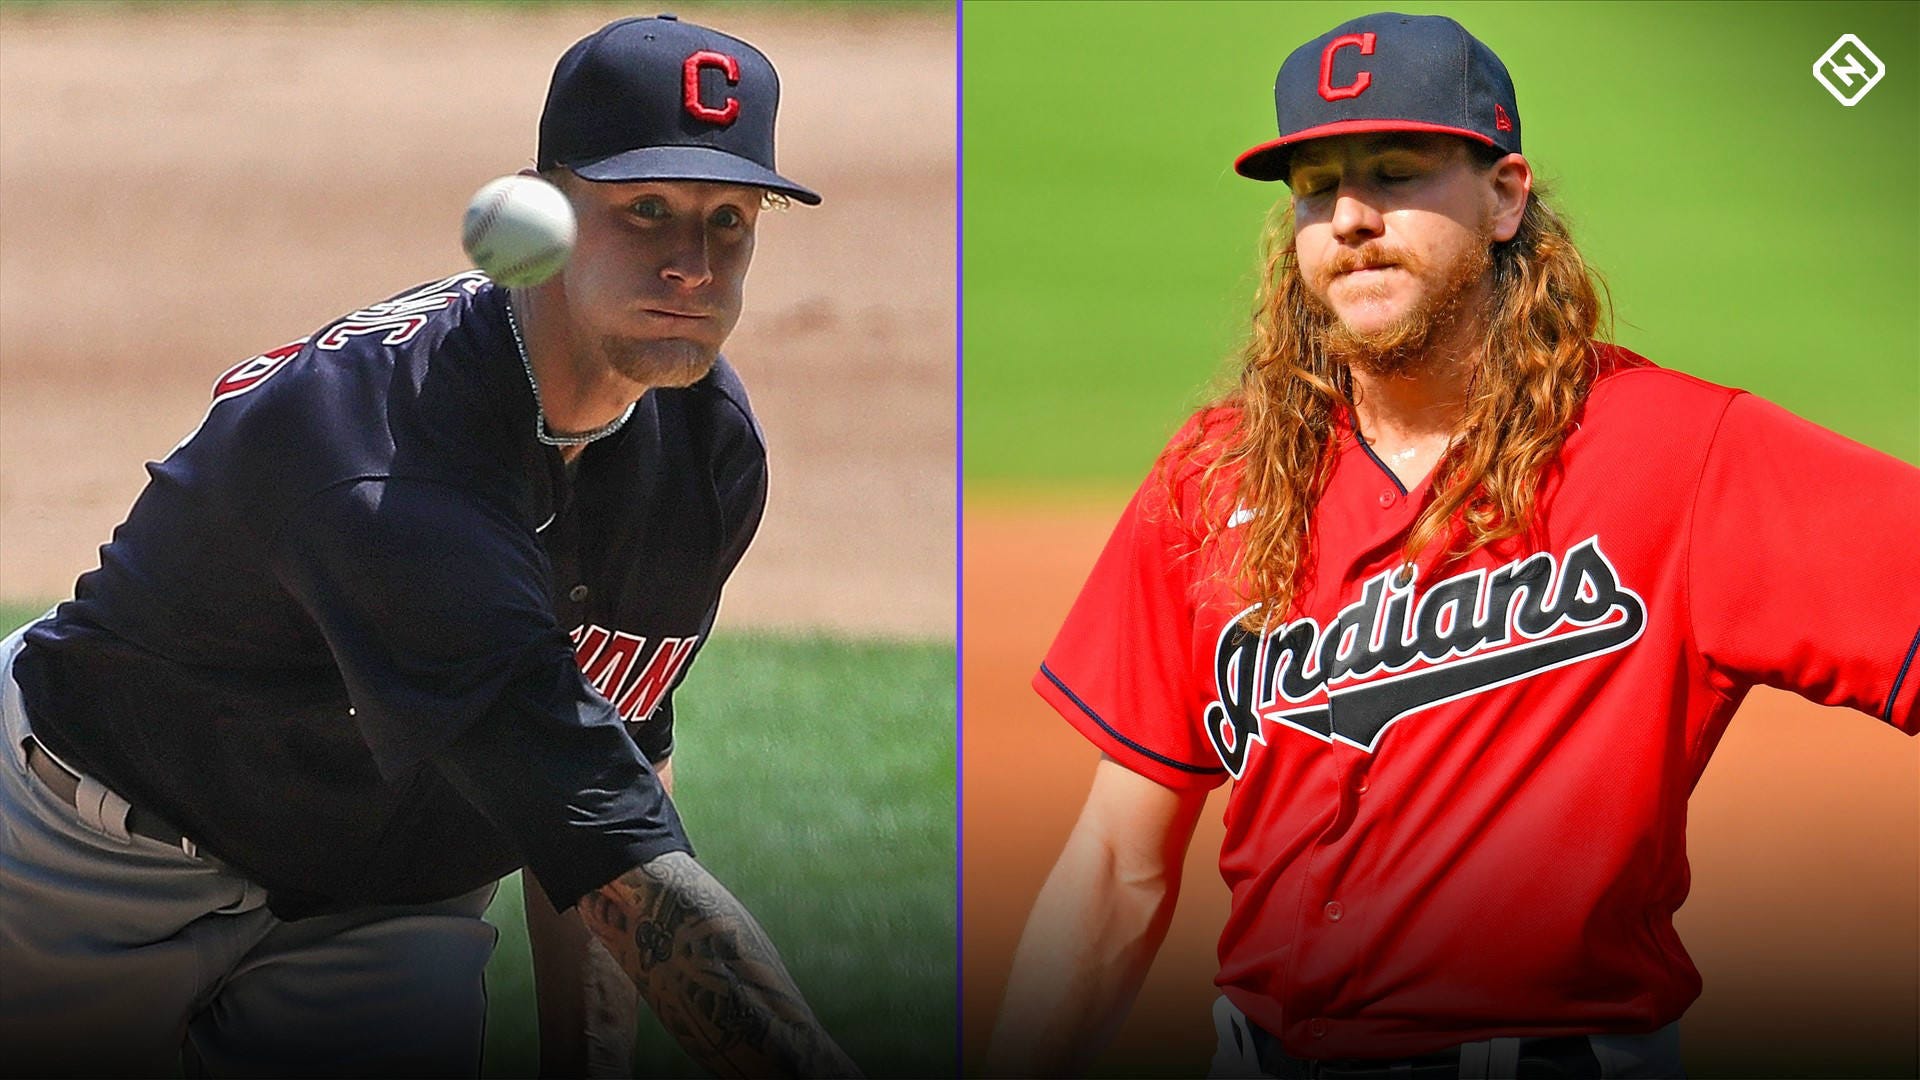 Cleveland Indians pitcher Mike Clevinger discusses the best moment